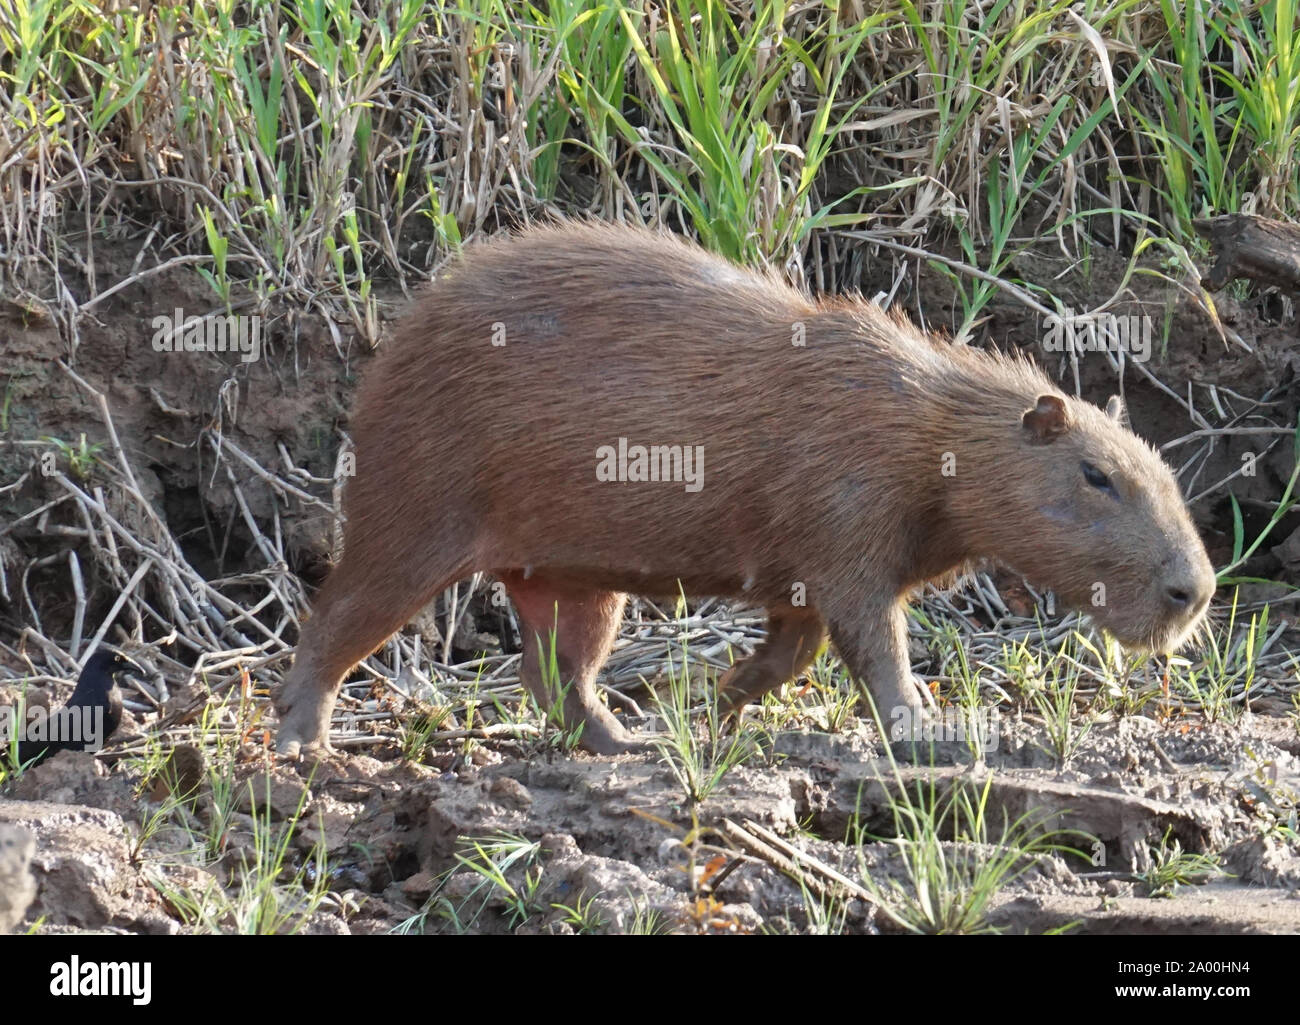 The capybara (Hydrochoerus hydrochaeris) is a mammal native to South America. It is the largest living rodent in the world. Also called chigüire, chigüiro and carpincho, this is a wild animal photographed on the banks of the River Amazon. Stock Photo